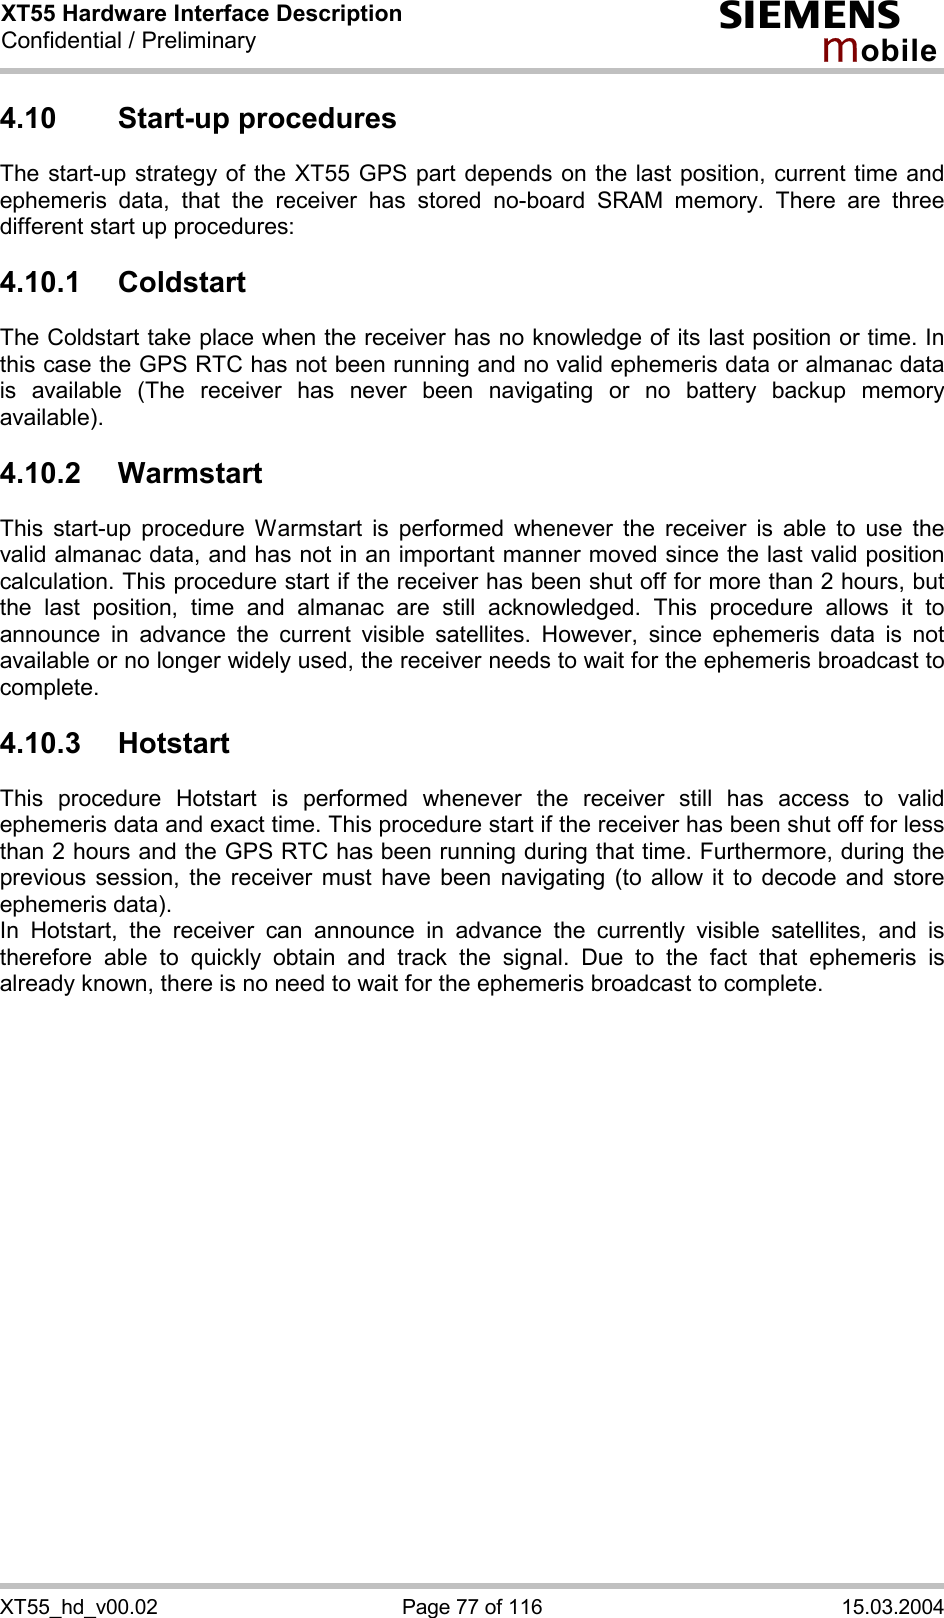 XT55 Hardware Interface Description Confidential / Preliminary s mo b i l e XT55_hd_v00.02  Page 77 of 116  15.03.2004 4.10 Start-up procedures The start-up strategy of the XT55 GPS part depends on the last position, current time and ephemeris data, that the receiver has stored no-board SRAM memory. There are three different start up procedures:     4.10.1 Coldstart The Coldstart take place when the receiver has no knowledge of its last position or time. In this case the GPS RTC has not been running and no valid ephemeris data or almanac data is available (The receiver has never been navigating or no battery backup memory available). 4.10.2 Warmstart This start-up procedure Warmstart is performed whenever the receiver is able to use the valid almanac data, and has not in an important manner moved since the last valid position calculation. This procedure start if the receiver has been shut off for more than 2 hours, but the last position, time and almanac are still acknowledged. This procedure allows it to announce in advance the current visible satellites. However, since ephemeris data is not available or no longer widely used, the receiver needs to wait for the ephemeris broadcast to complete. 4.10.3 Hotstart This procedure Hotstart is performed whenever the receiver still has access to valid ephemeris data and exact time. This procedure start if the receiver has been shut off for less than 2 hours and the GPS RTC has been running during that time. Furthermore, during the previous session, the receiver must have been navigating (to allow it to decode and store ephemeris data). In Hotstart, the receiver can announce in advance the currently visible satellites, and is therefore able to quickly obtain and track the signal. Due to the fact that ephemeris is already known, there is no need to wait for the ephemeris broadcast to complete.  